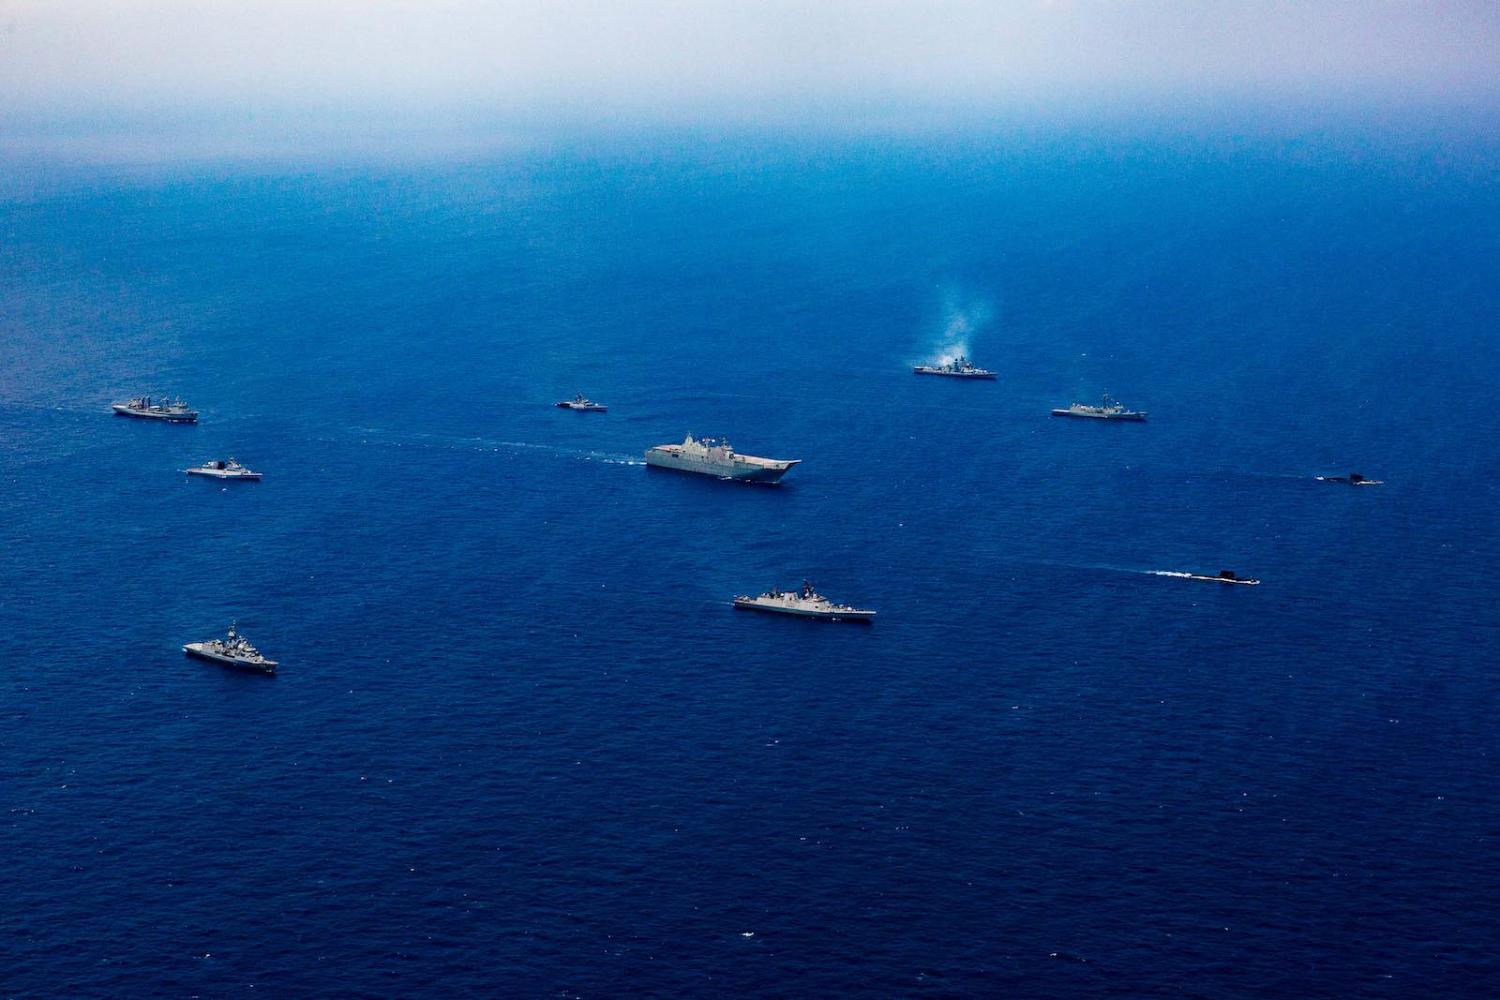 A task group of naval ships from Australia and India in formation in the Bay of Bengal during the sea phase of AUSINDEX 2019 (Department of Defence)